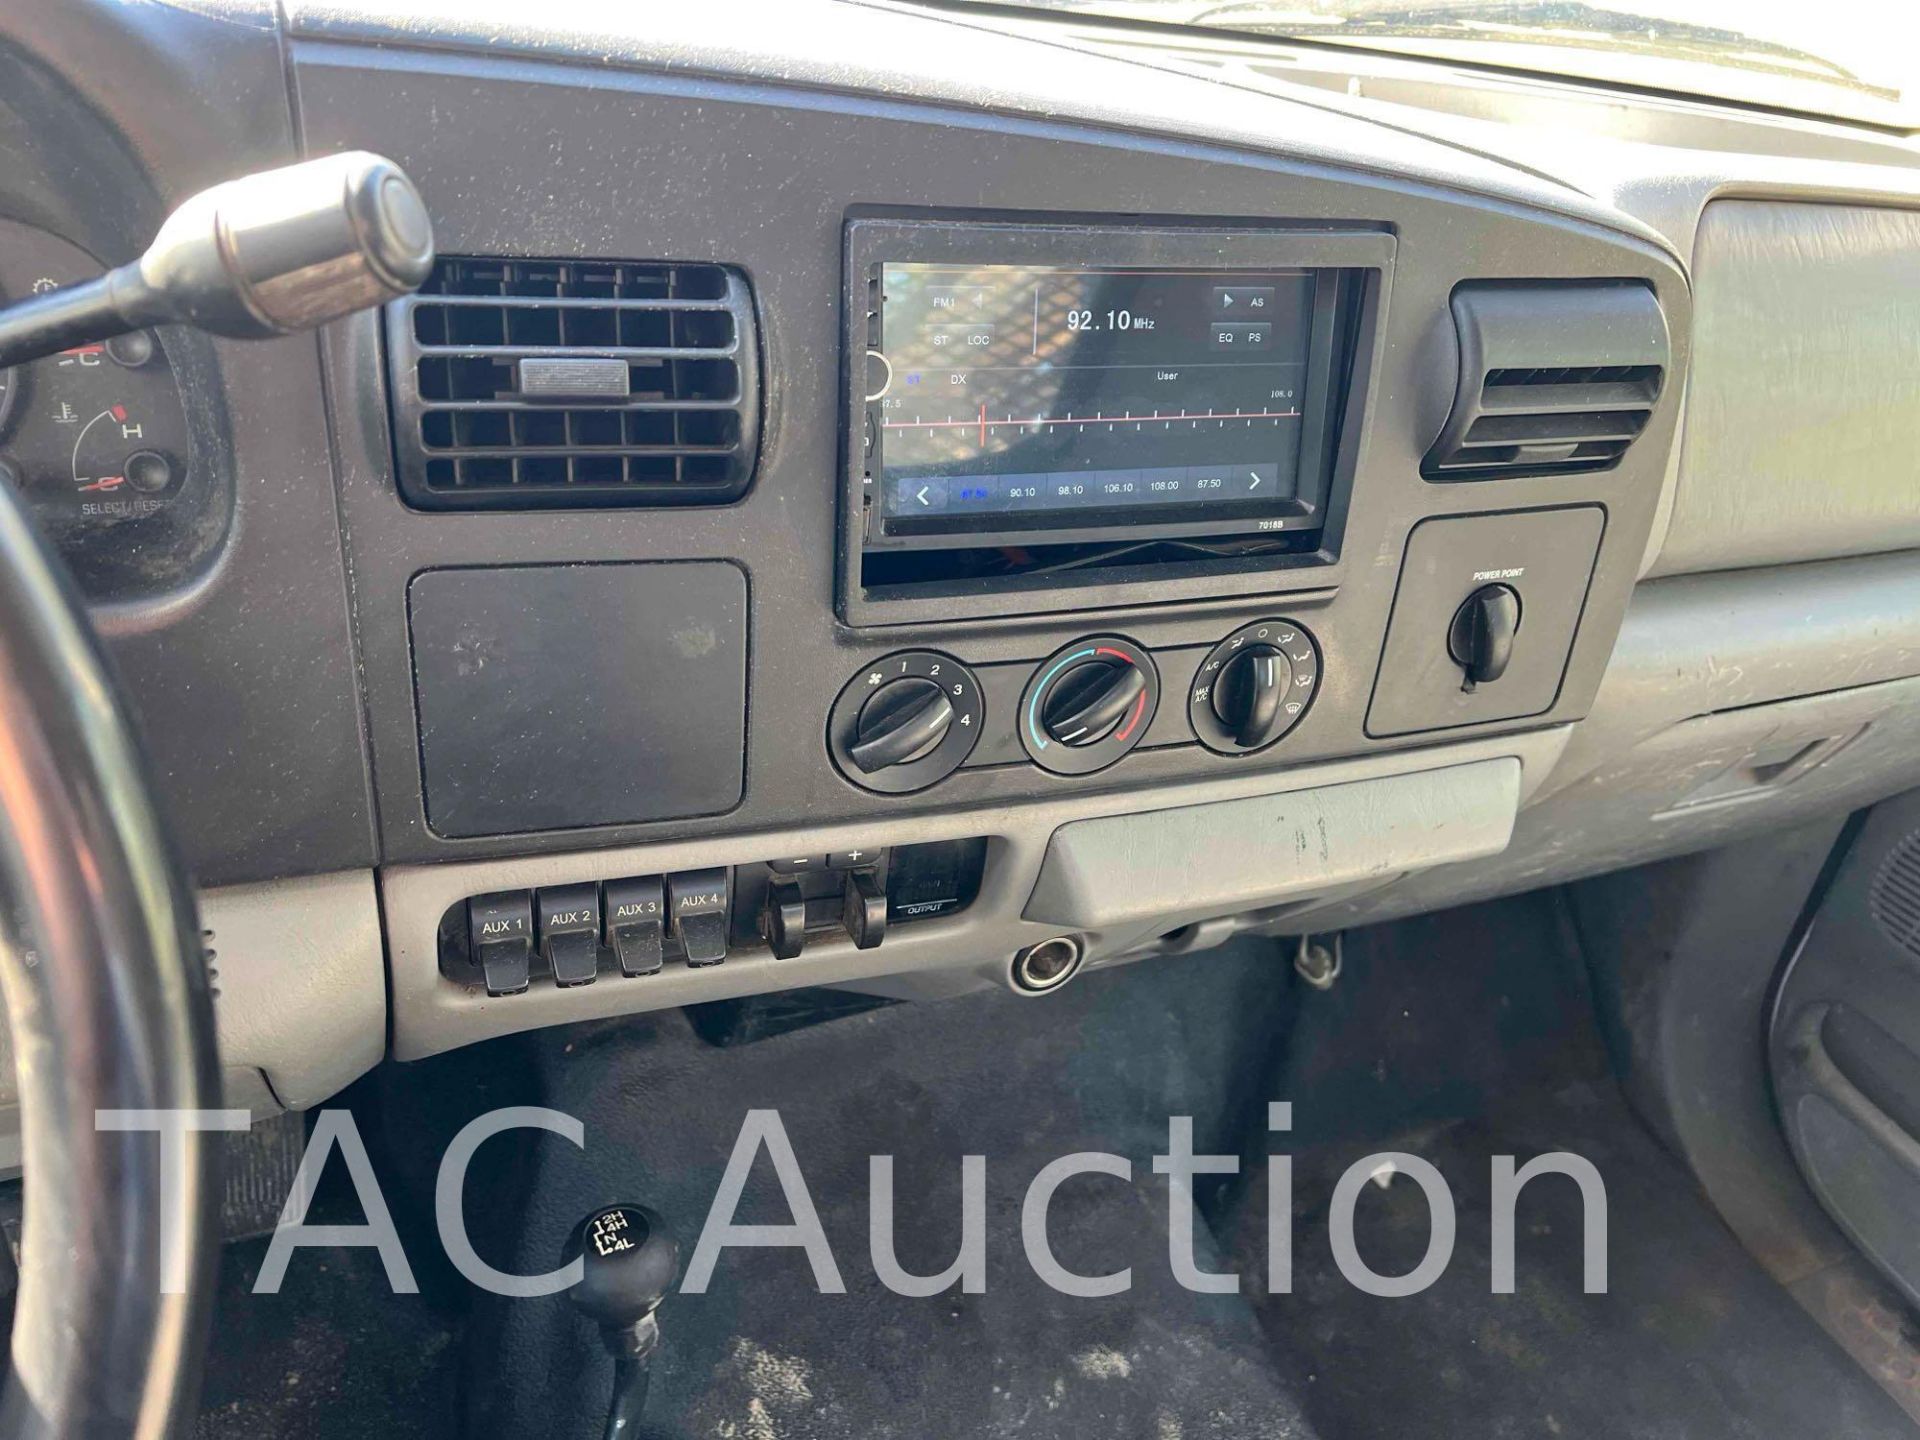 2005 Ford F350 4x4 W/ Landscape Body - Image 23 of 63